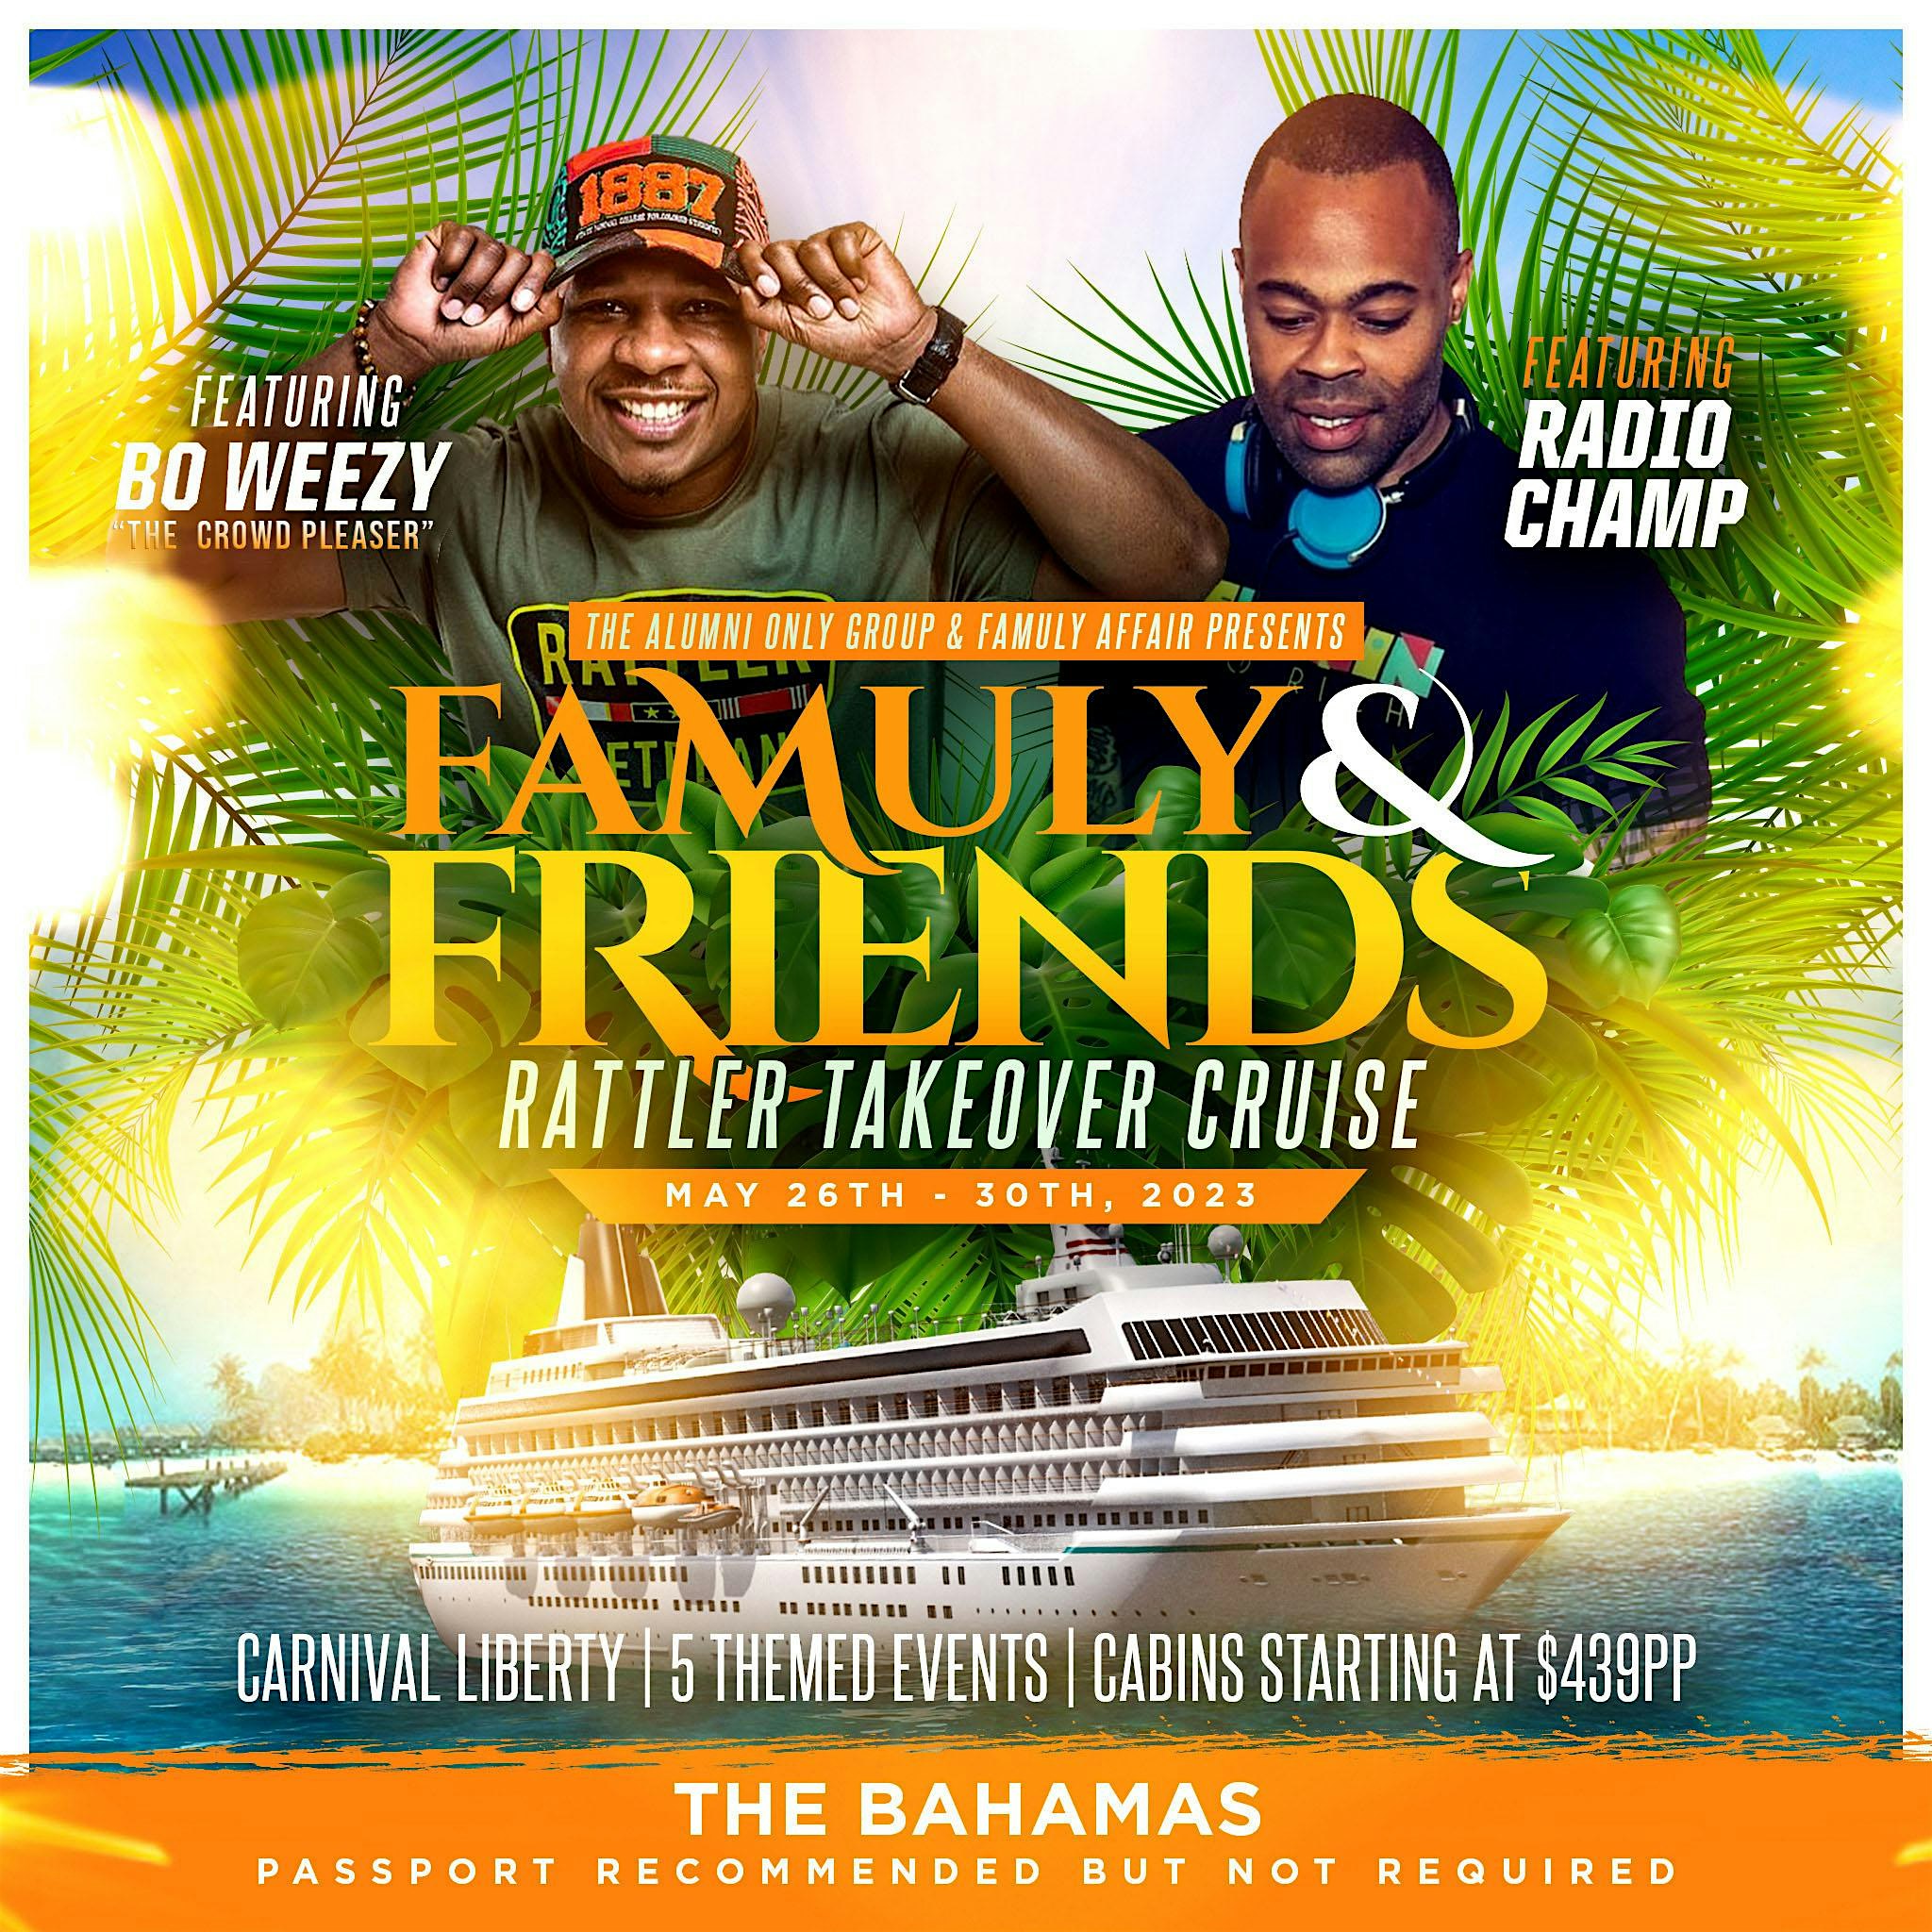 FAMULY &amp; Friends Rattler Takeover Cruise